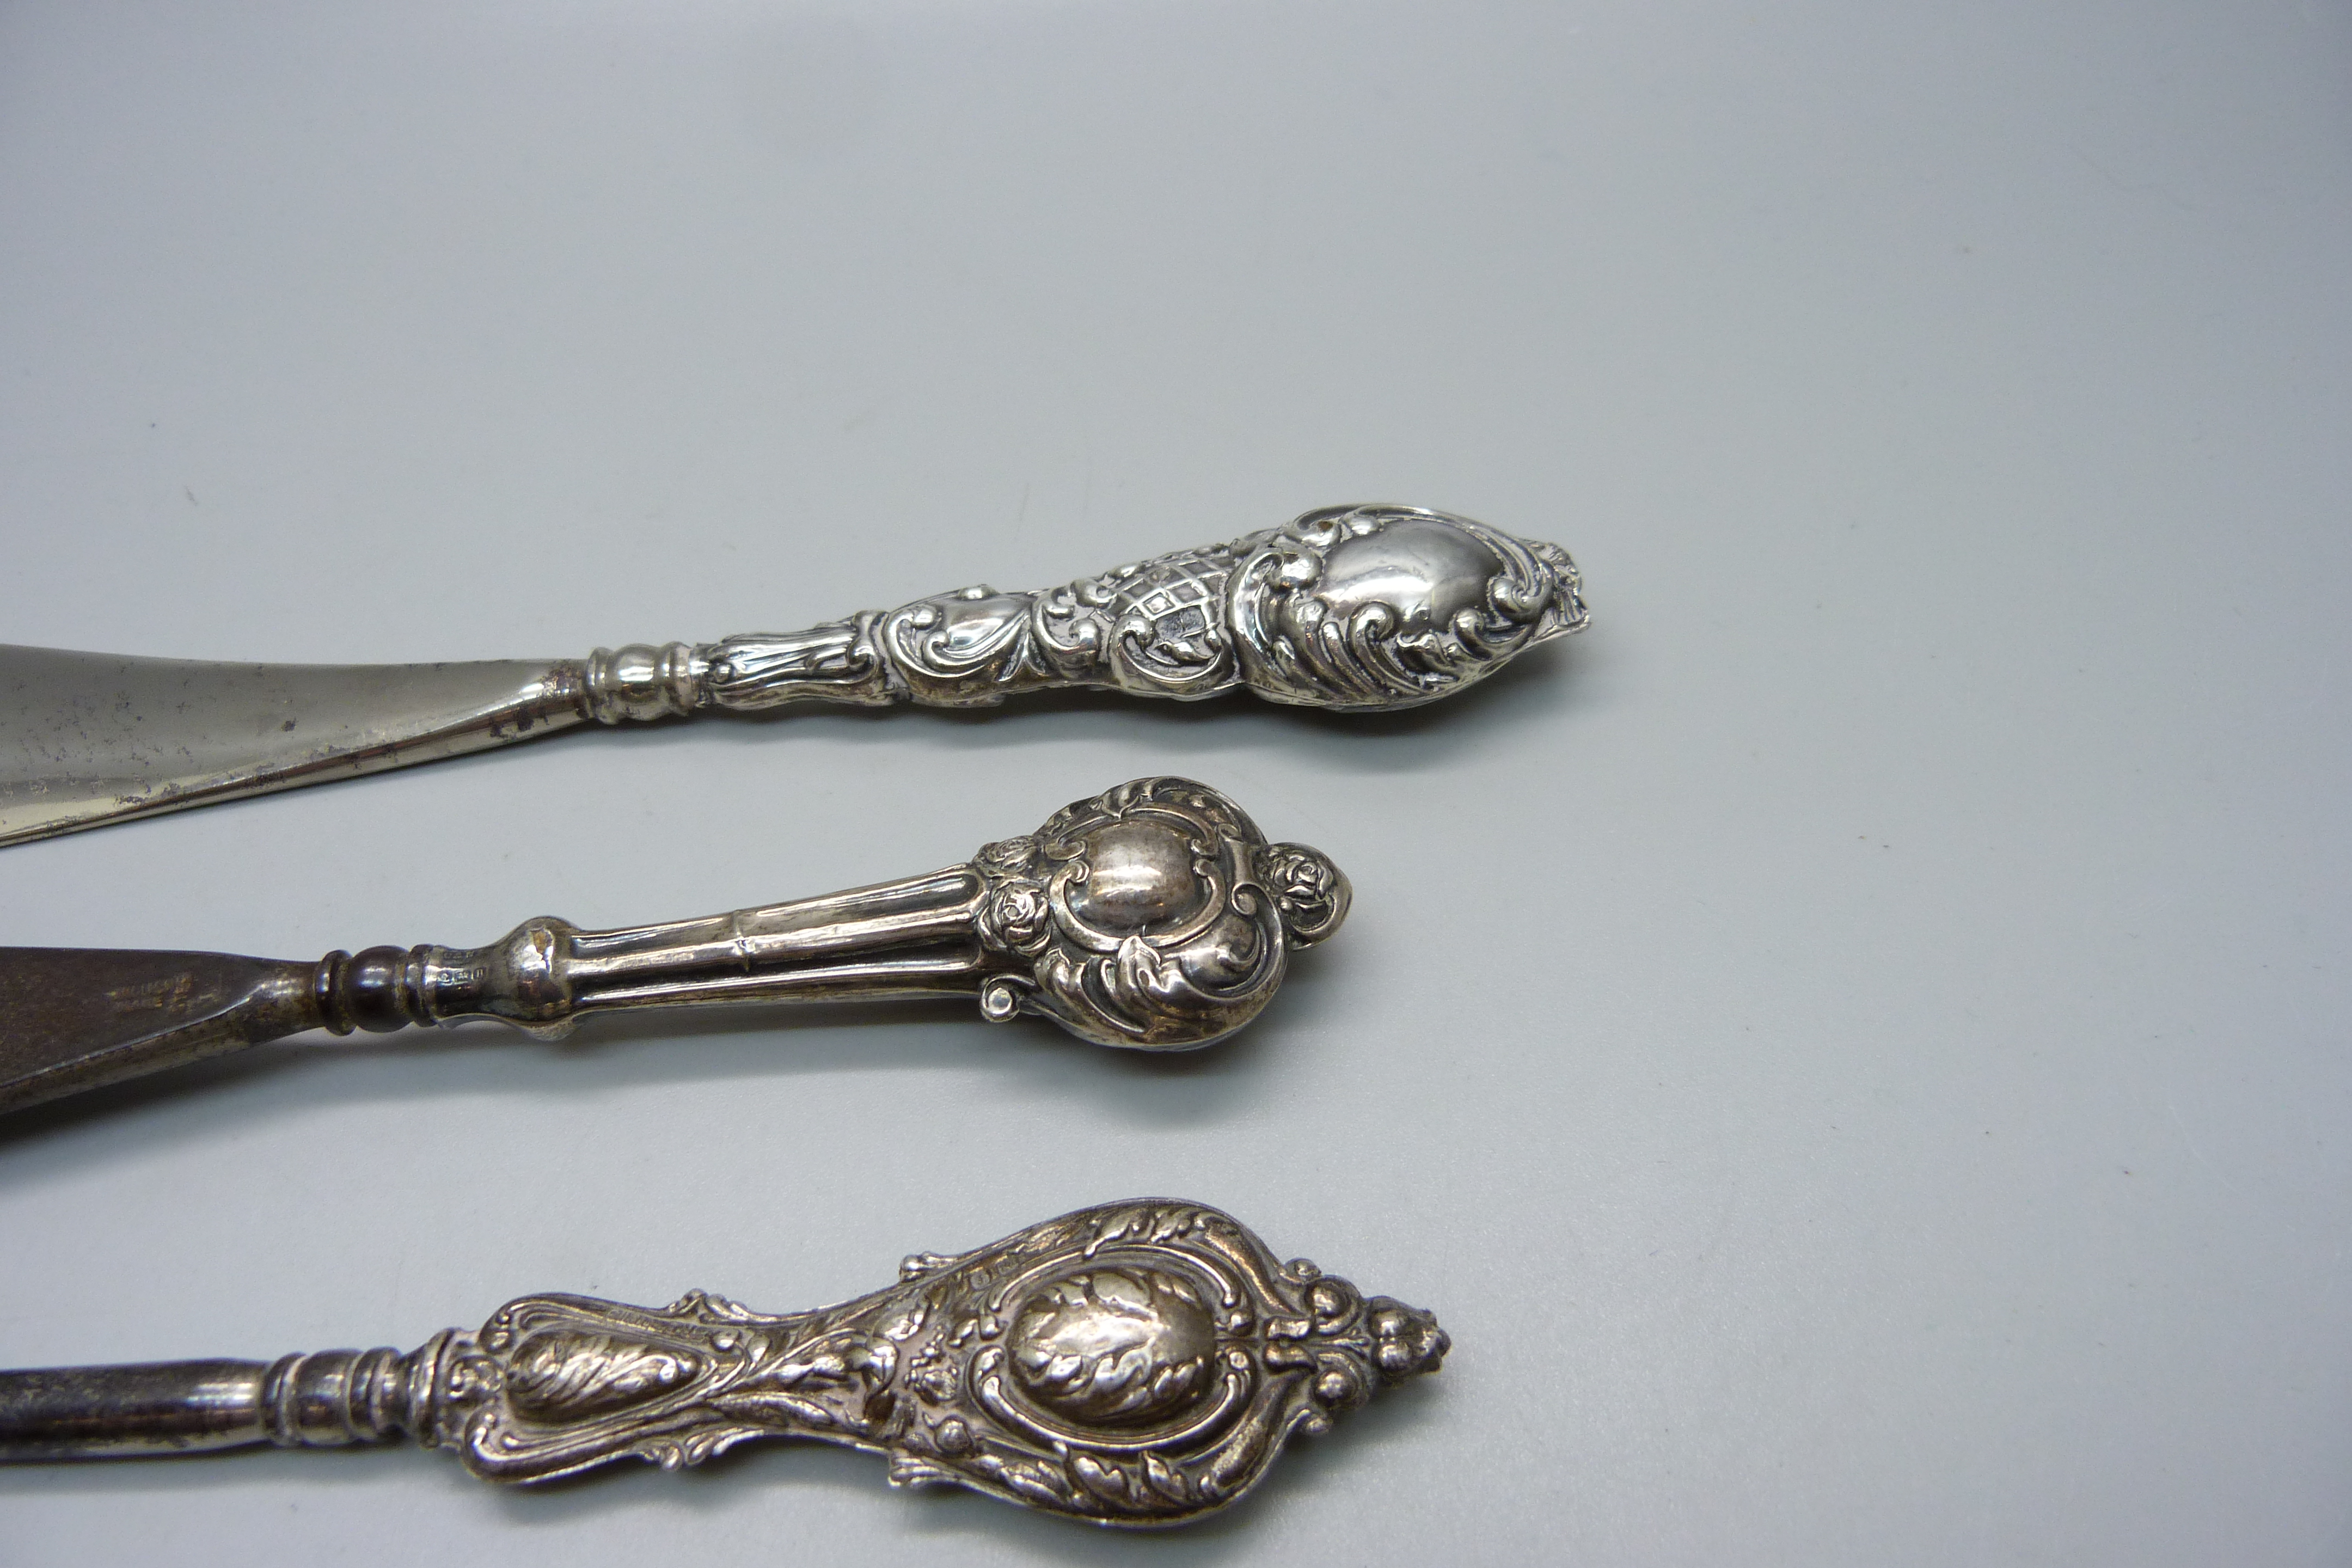 Two silver mounted shoe horns and two button hooks - Image 2 of 2